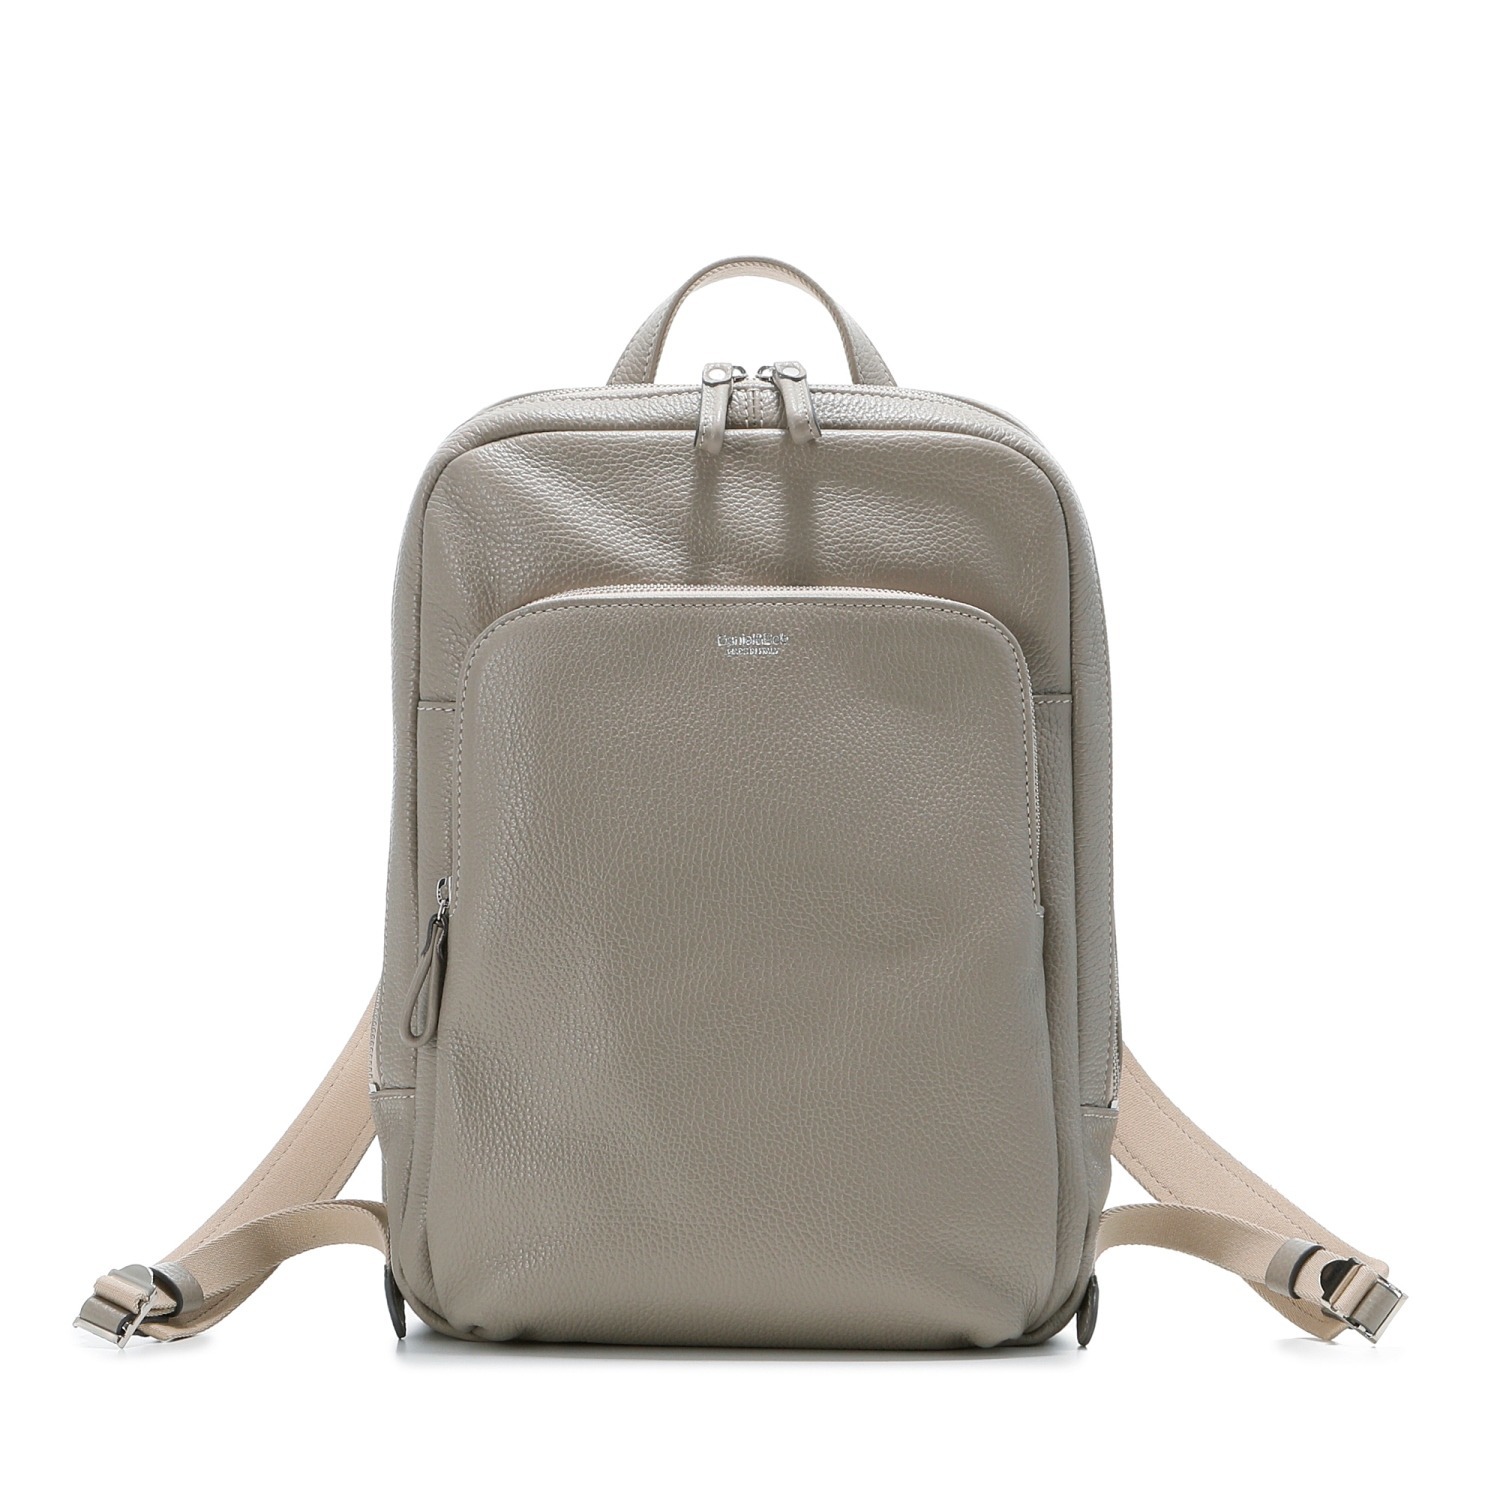 ZZ BACKPACK.27.1 ALCE accopiato 詳細画像 TAUPE 1